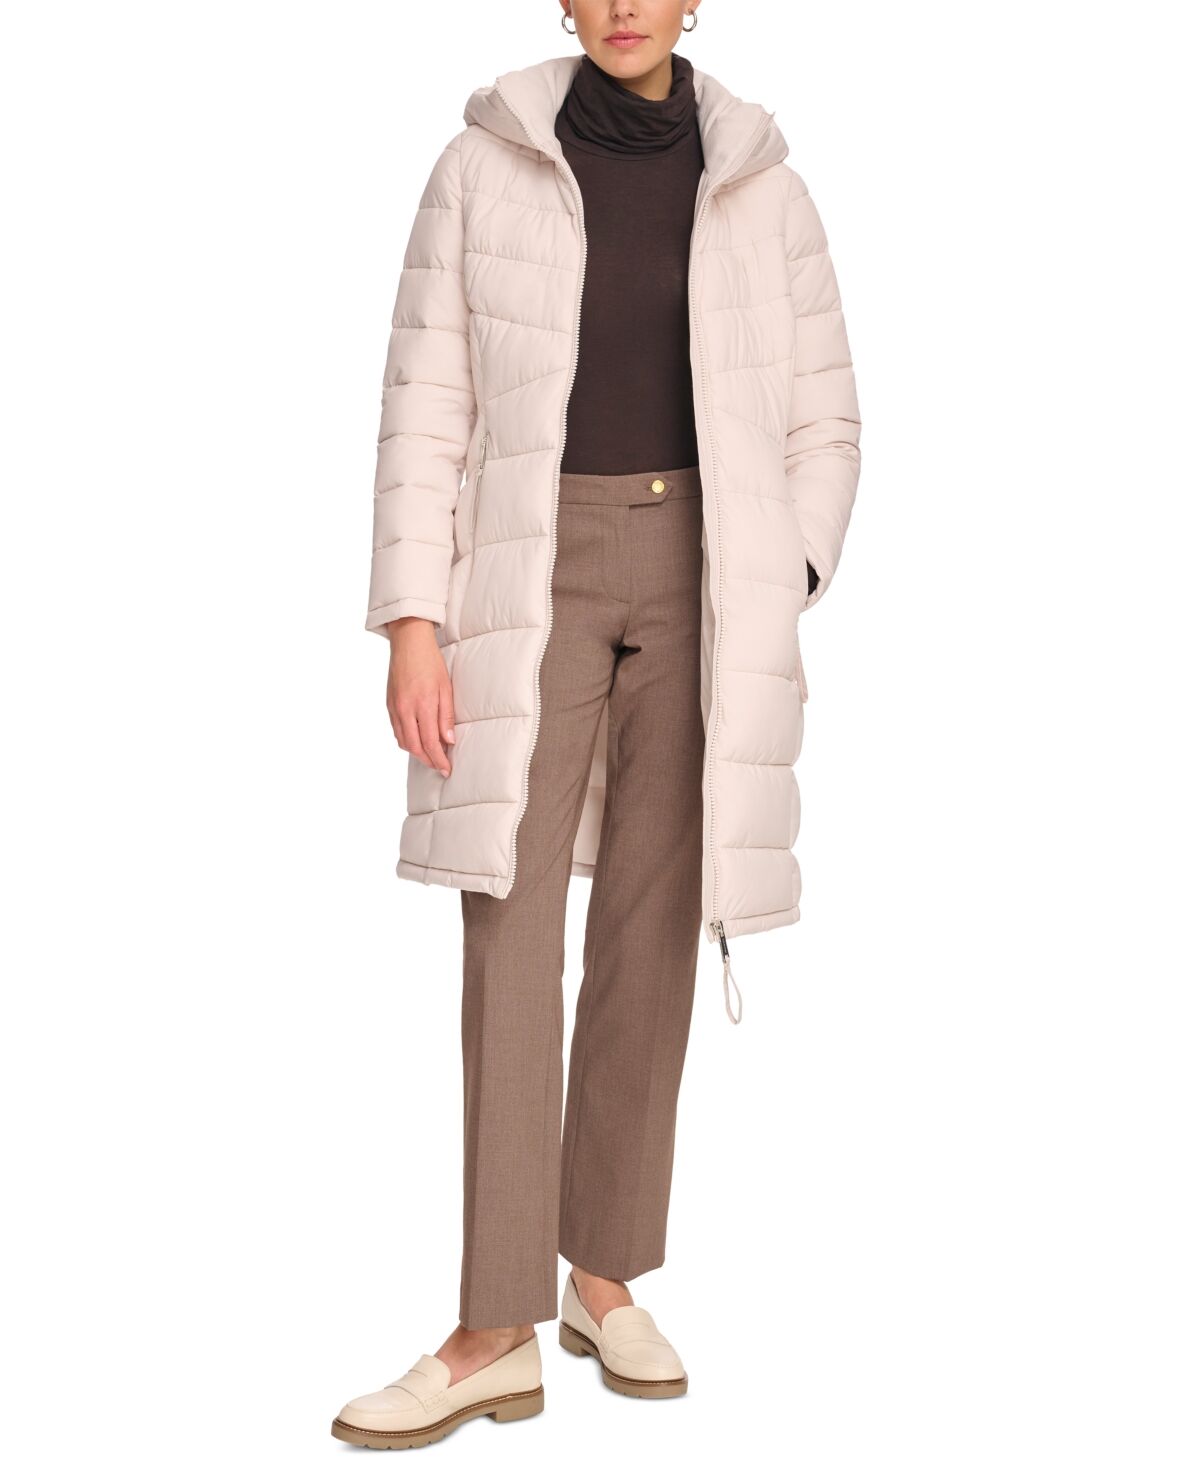 Calvin Klein Women's Hooded Stretch Puffer Coat, Created for Macy's - Oyster